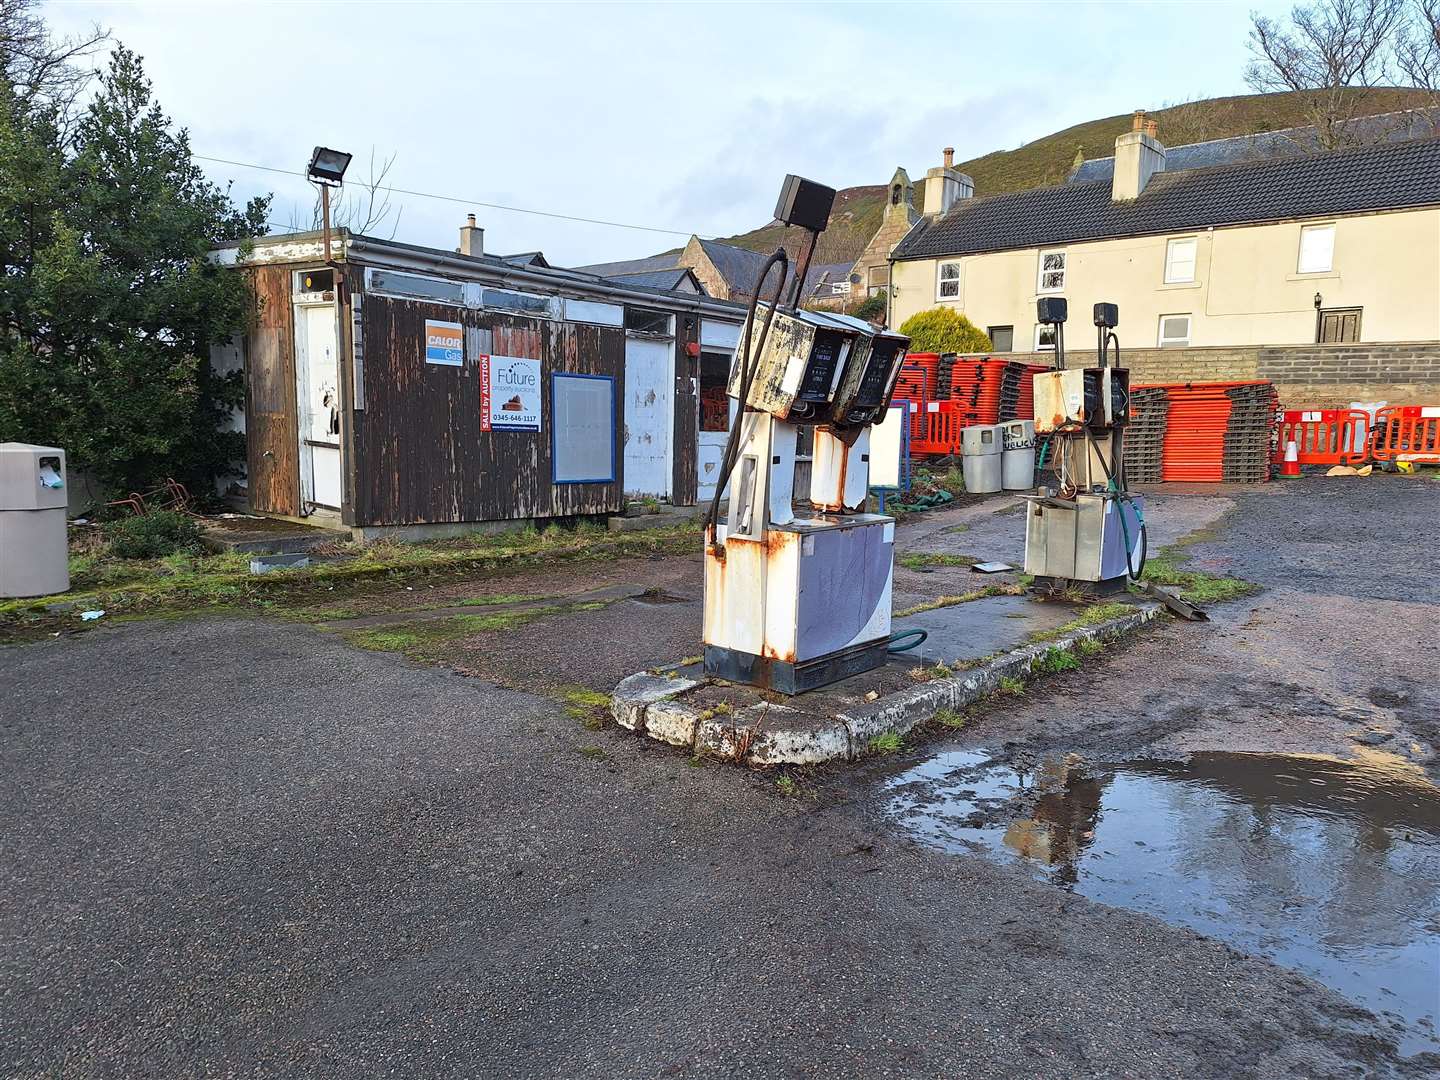 The site contains a semi-derelict timber built kiosk, fuel pumps and underground tanks.